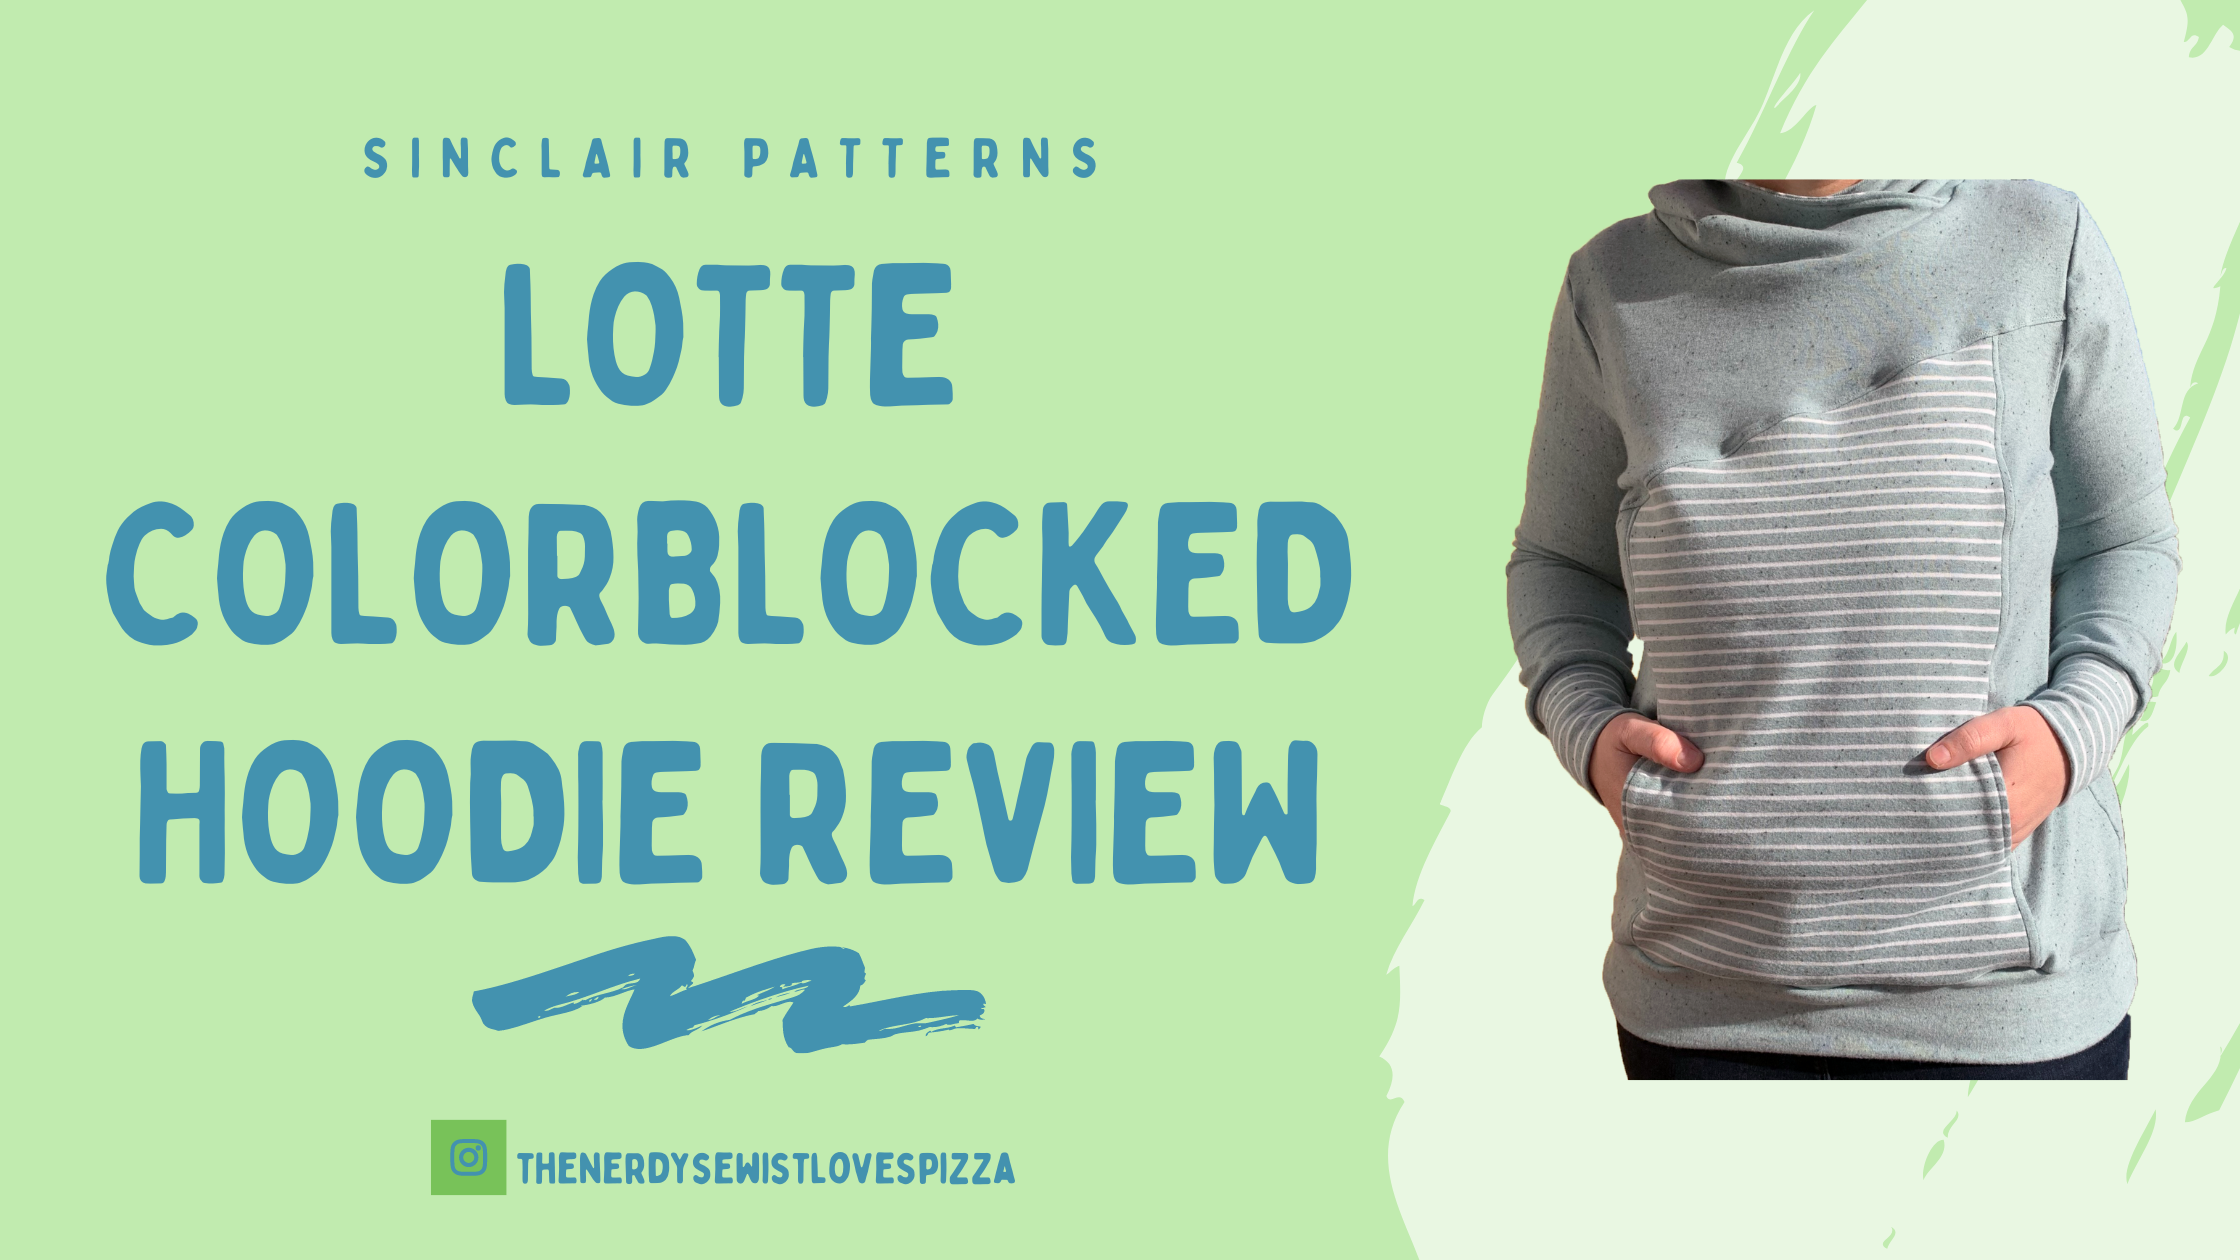 Sinclair Patterns - Kids Blueberry Tee Review - The Nerdy Sewist